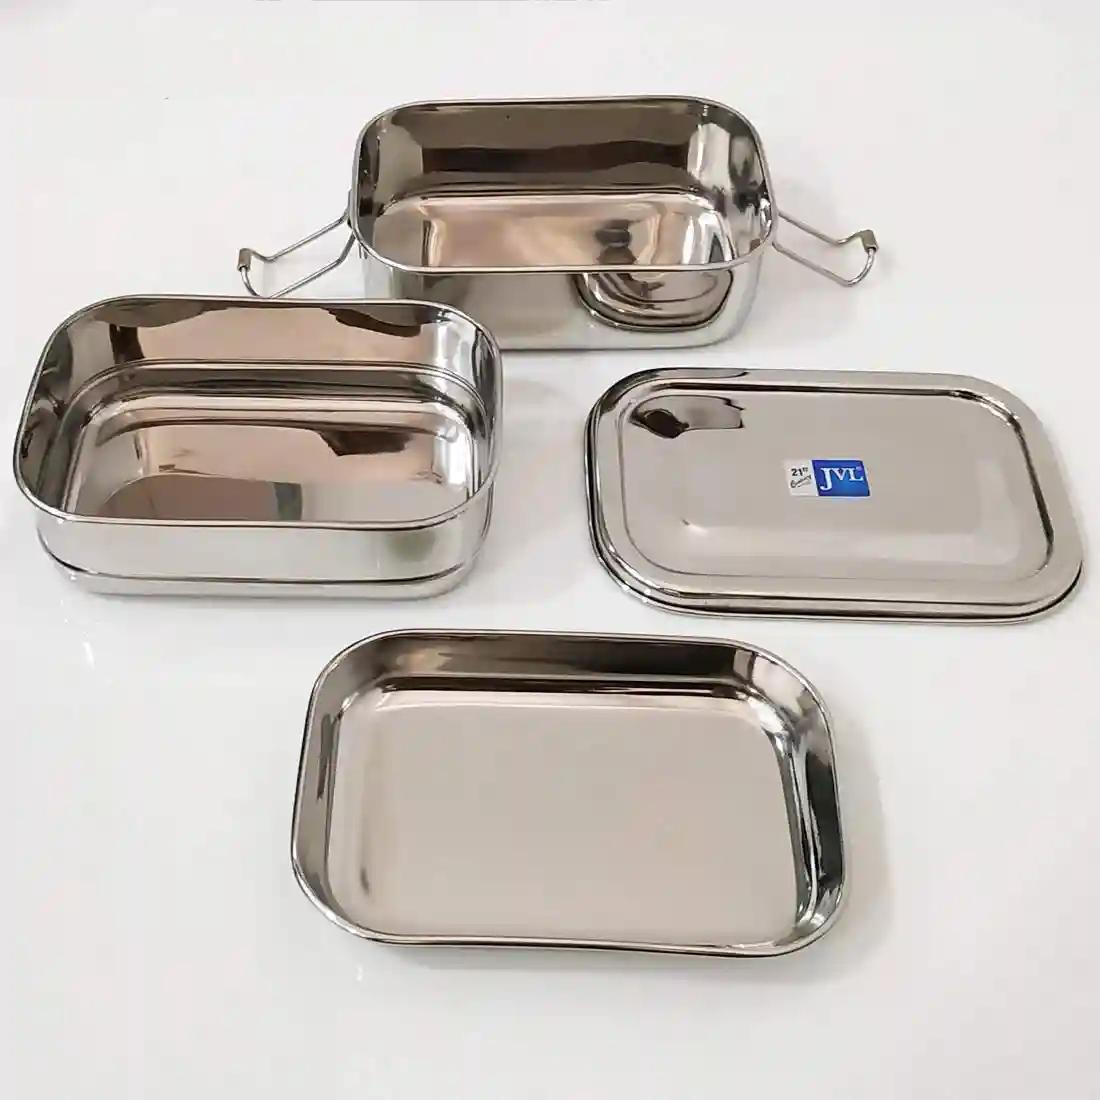 Jvl Stainless Steel Rectangular Shape Double Layer Lunch Box With Inner Plate & Small Triangle Shape Lunch Box With Mini Container Not Leak Proof - Pack Of 2